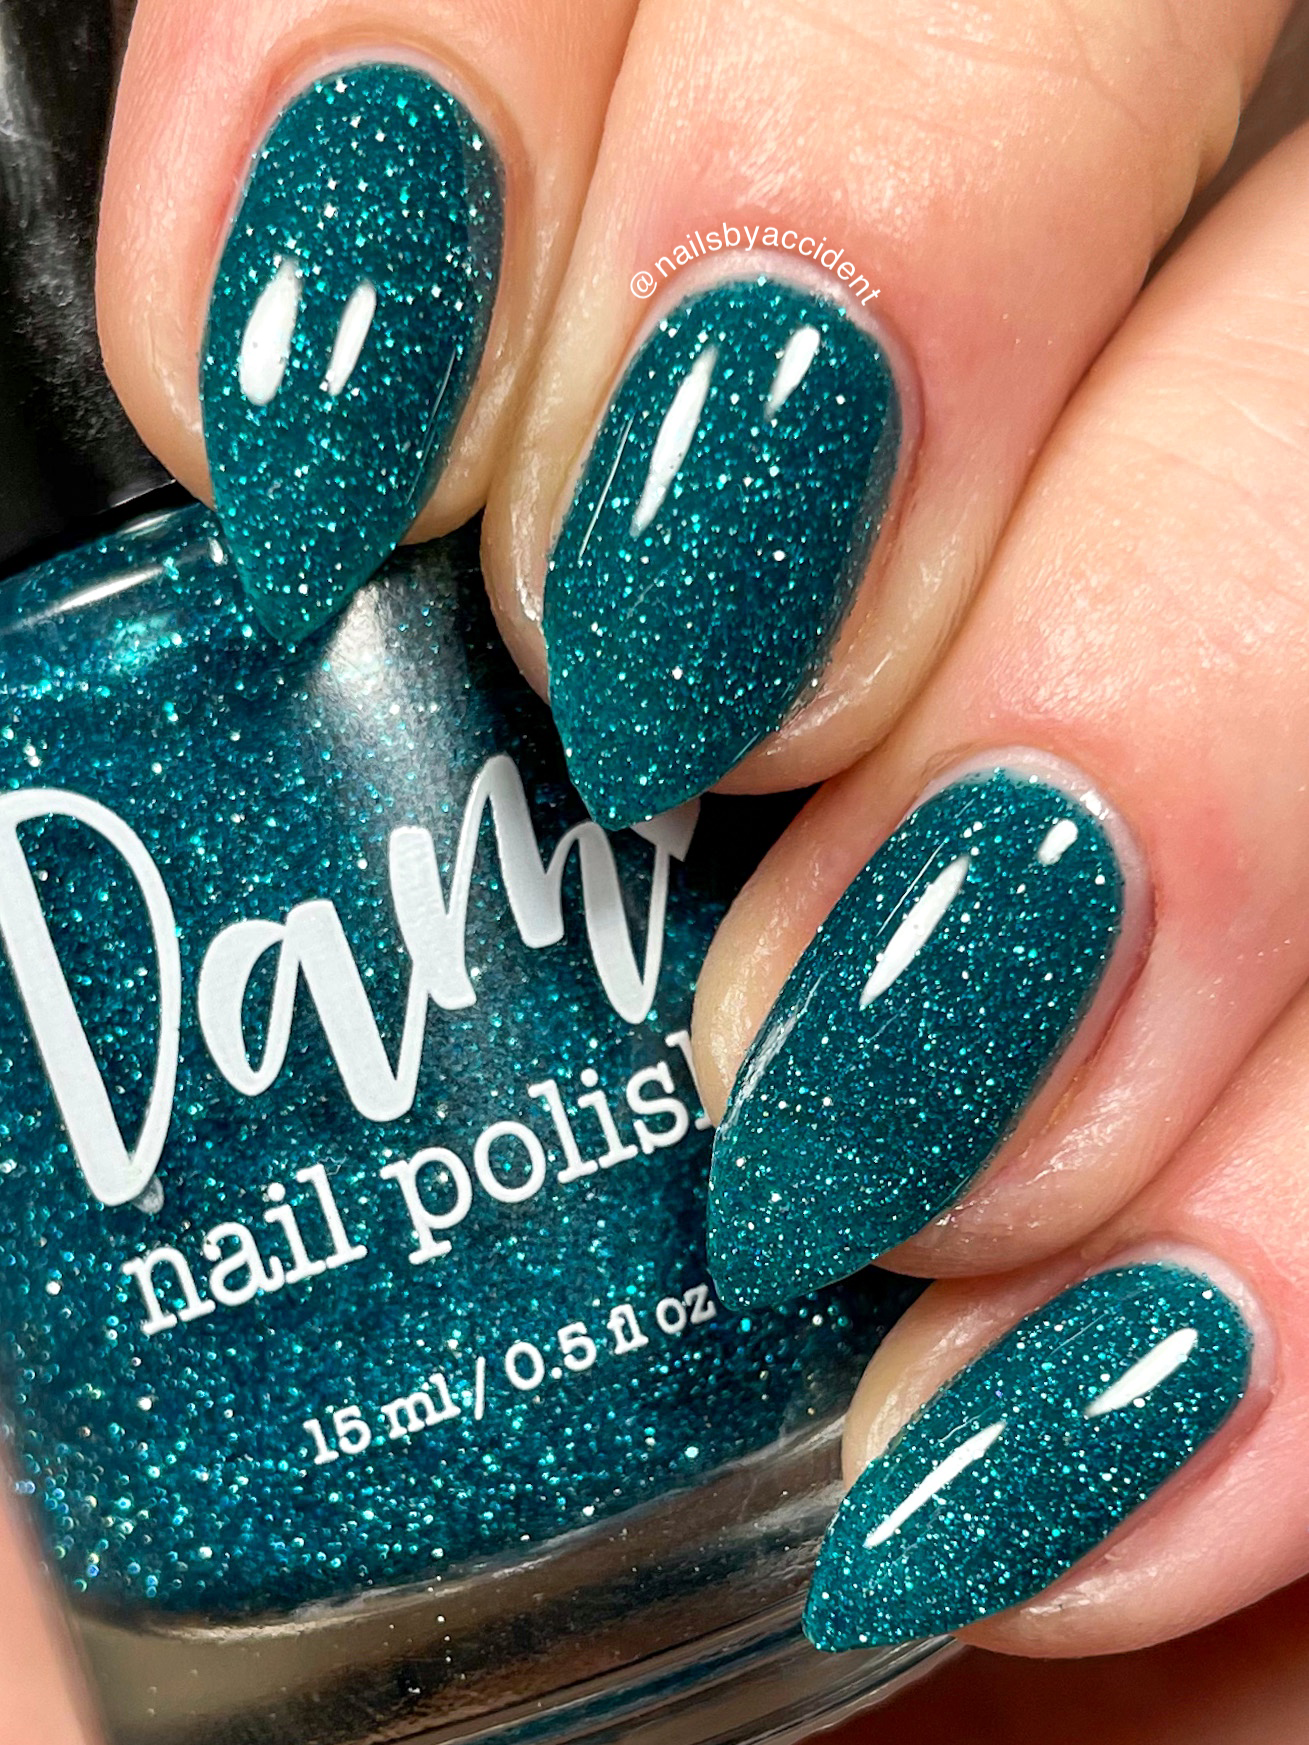 40 Great Nail Art Ideas - Teal - May contain traces of polish